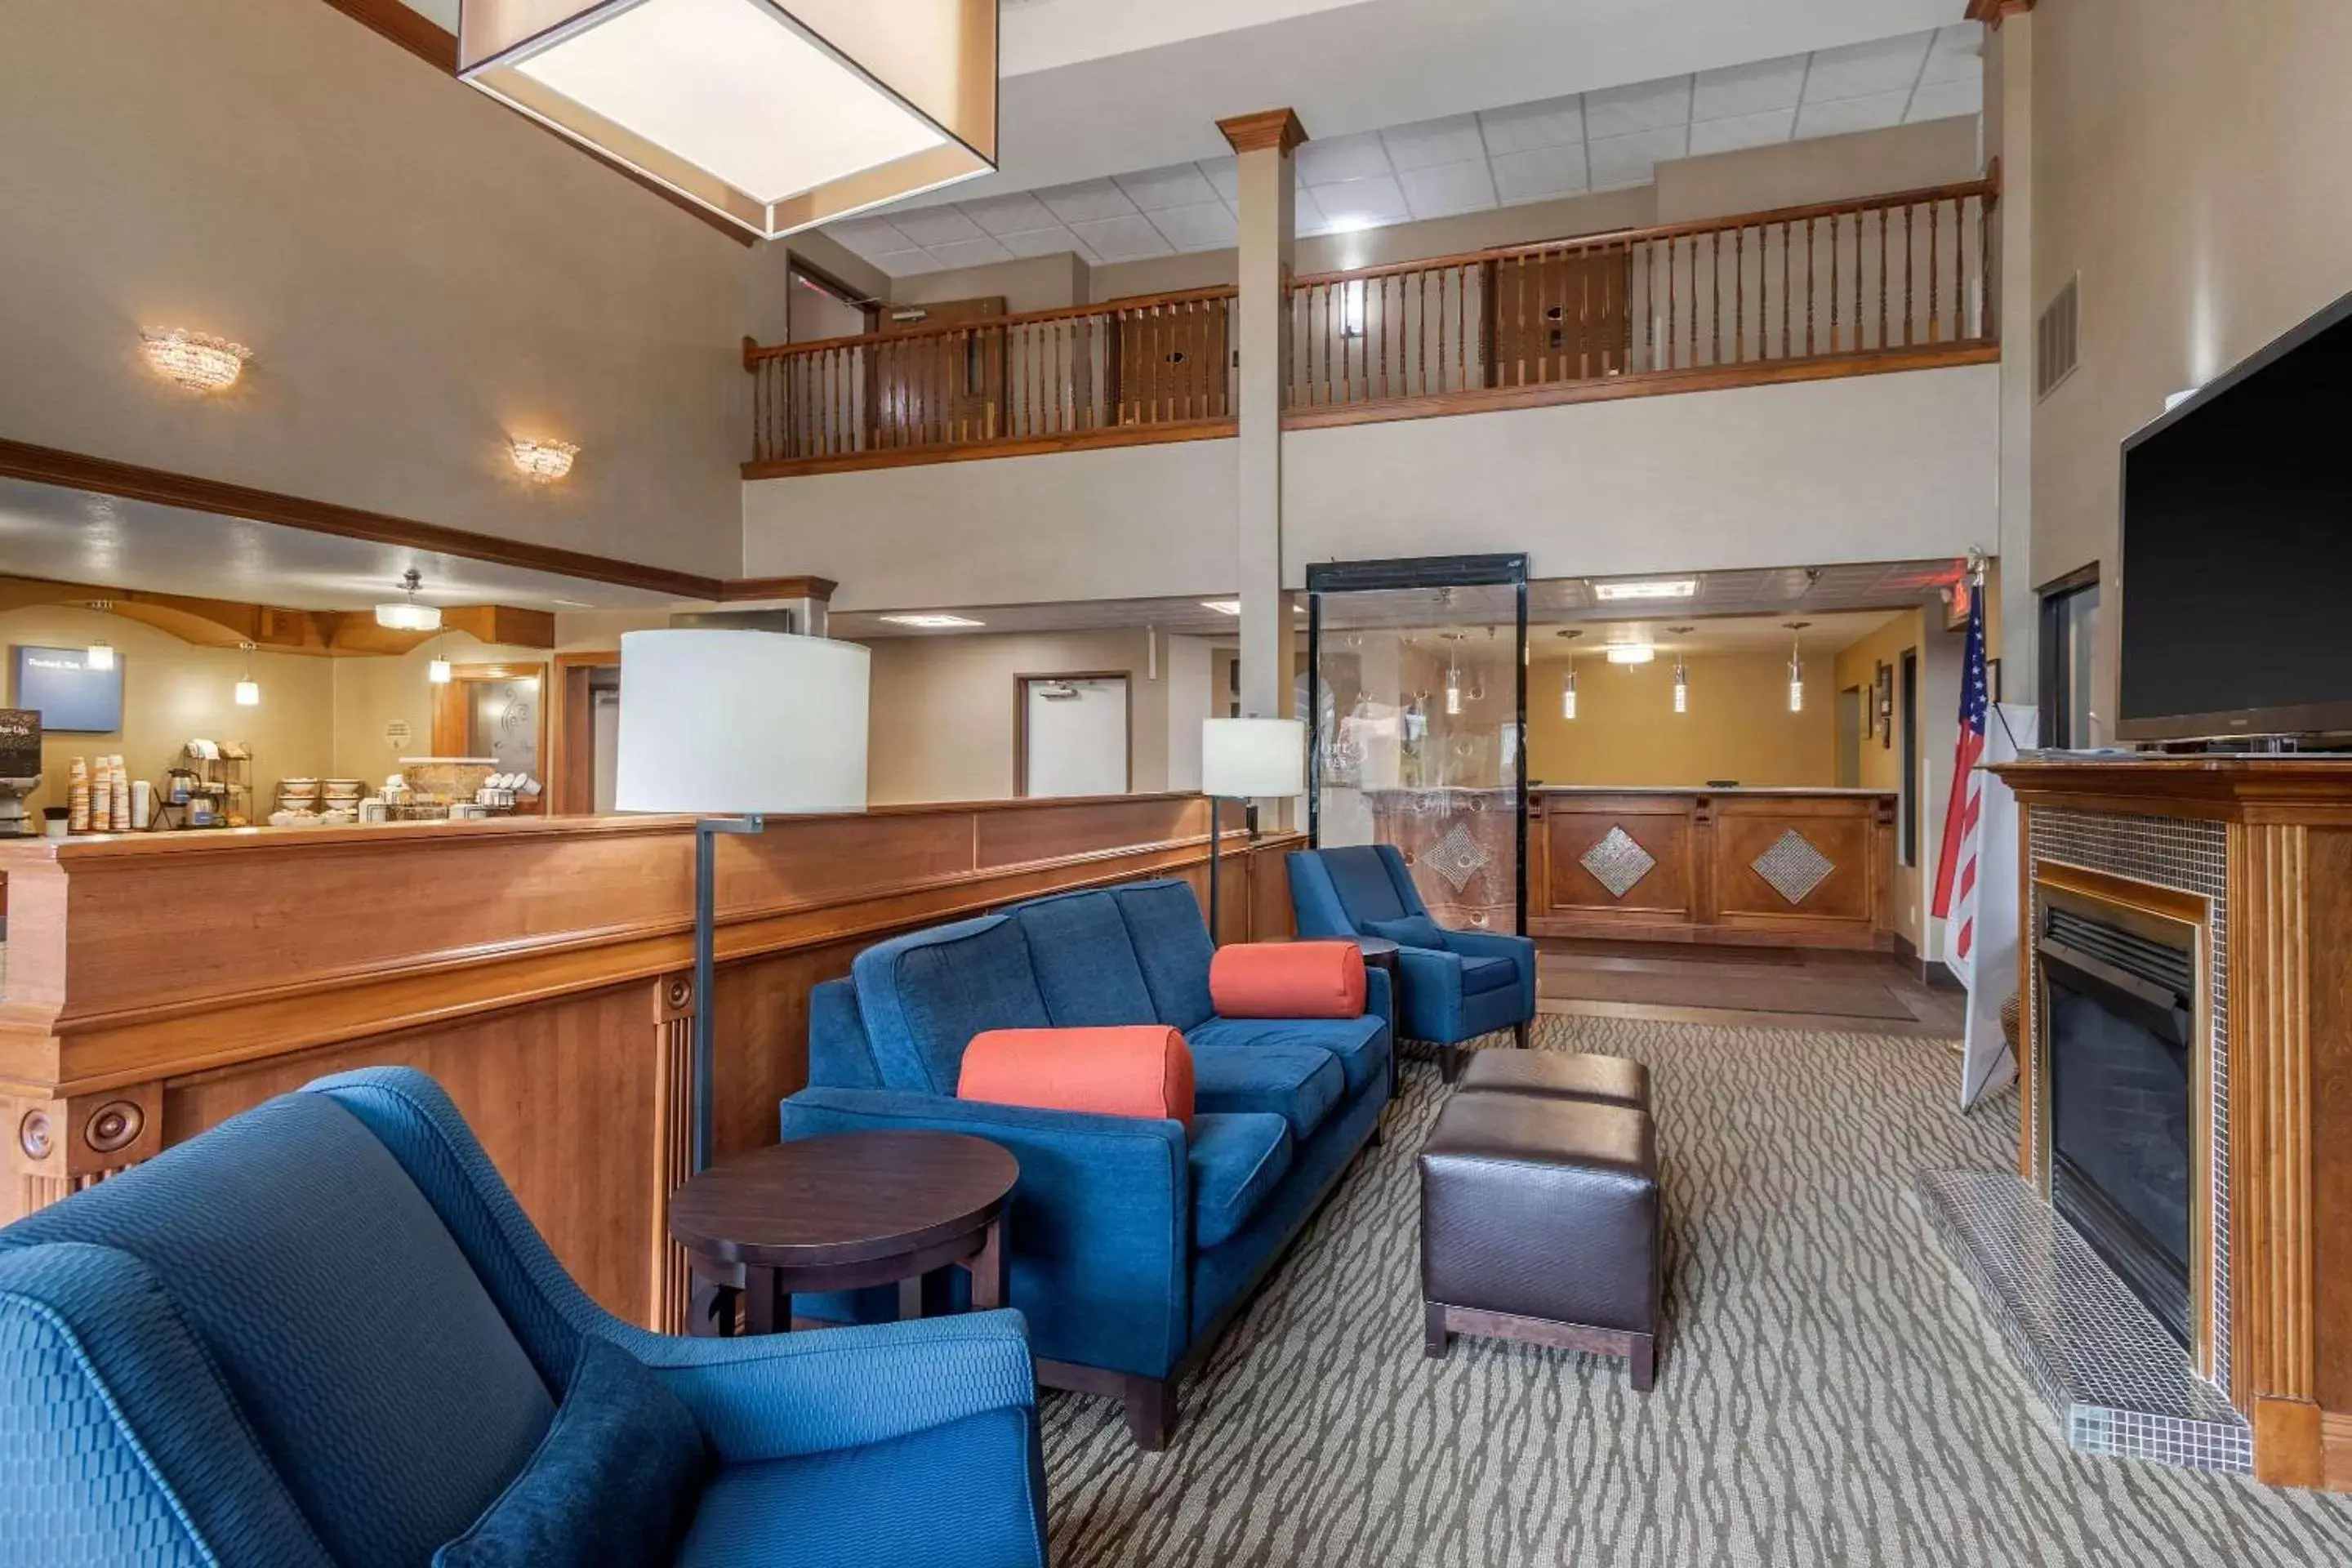 Lobby or reception in Comfort Inn & Suites Springfield I-44